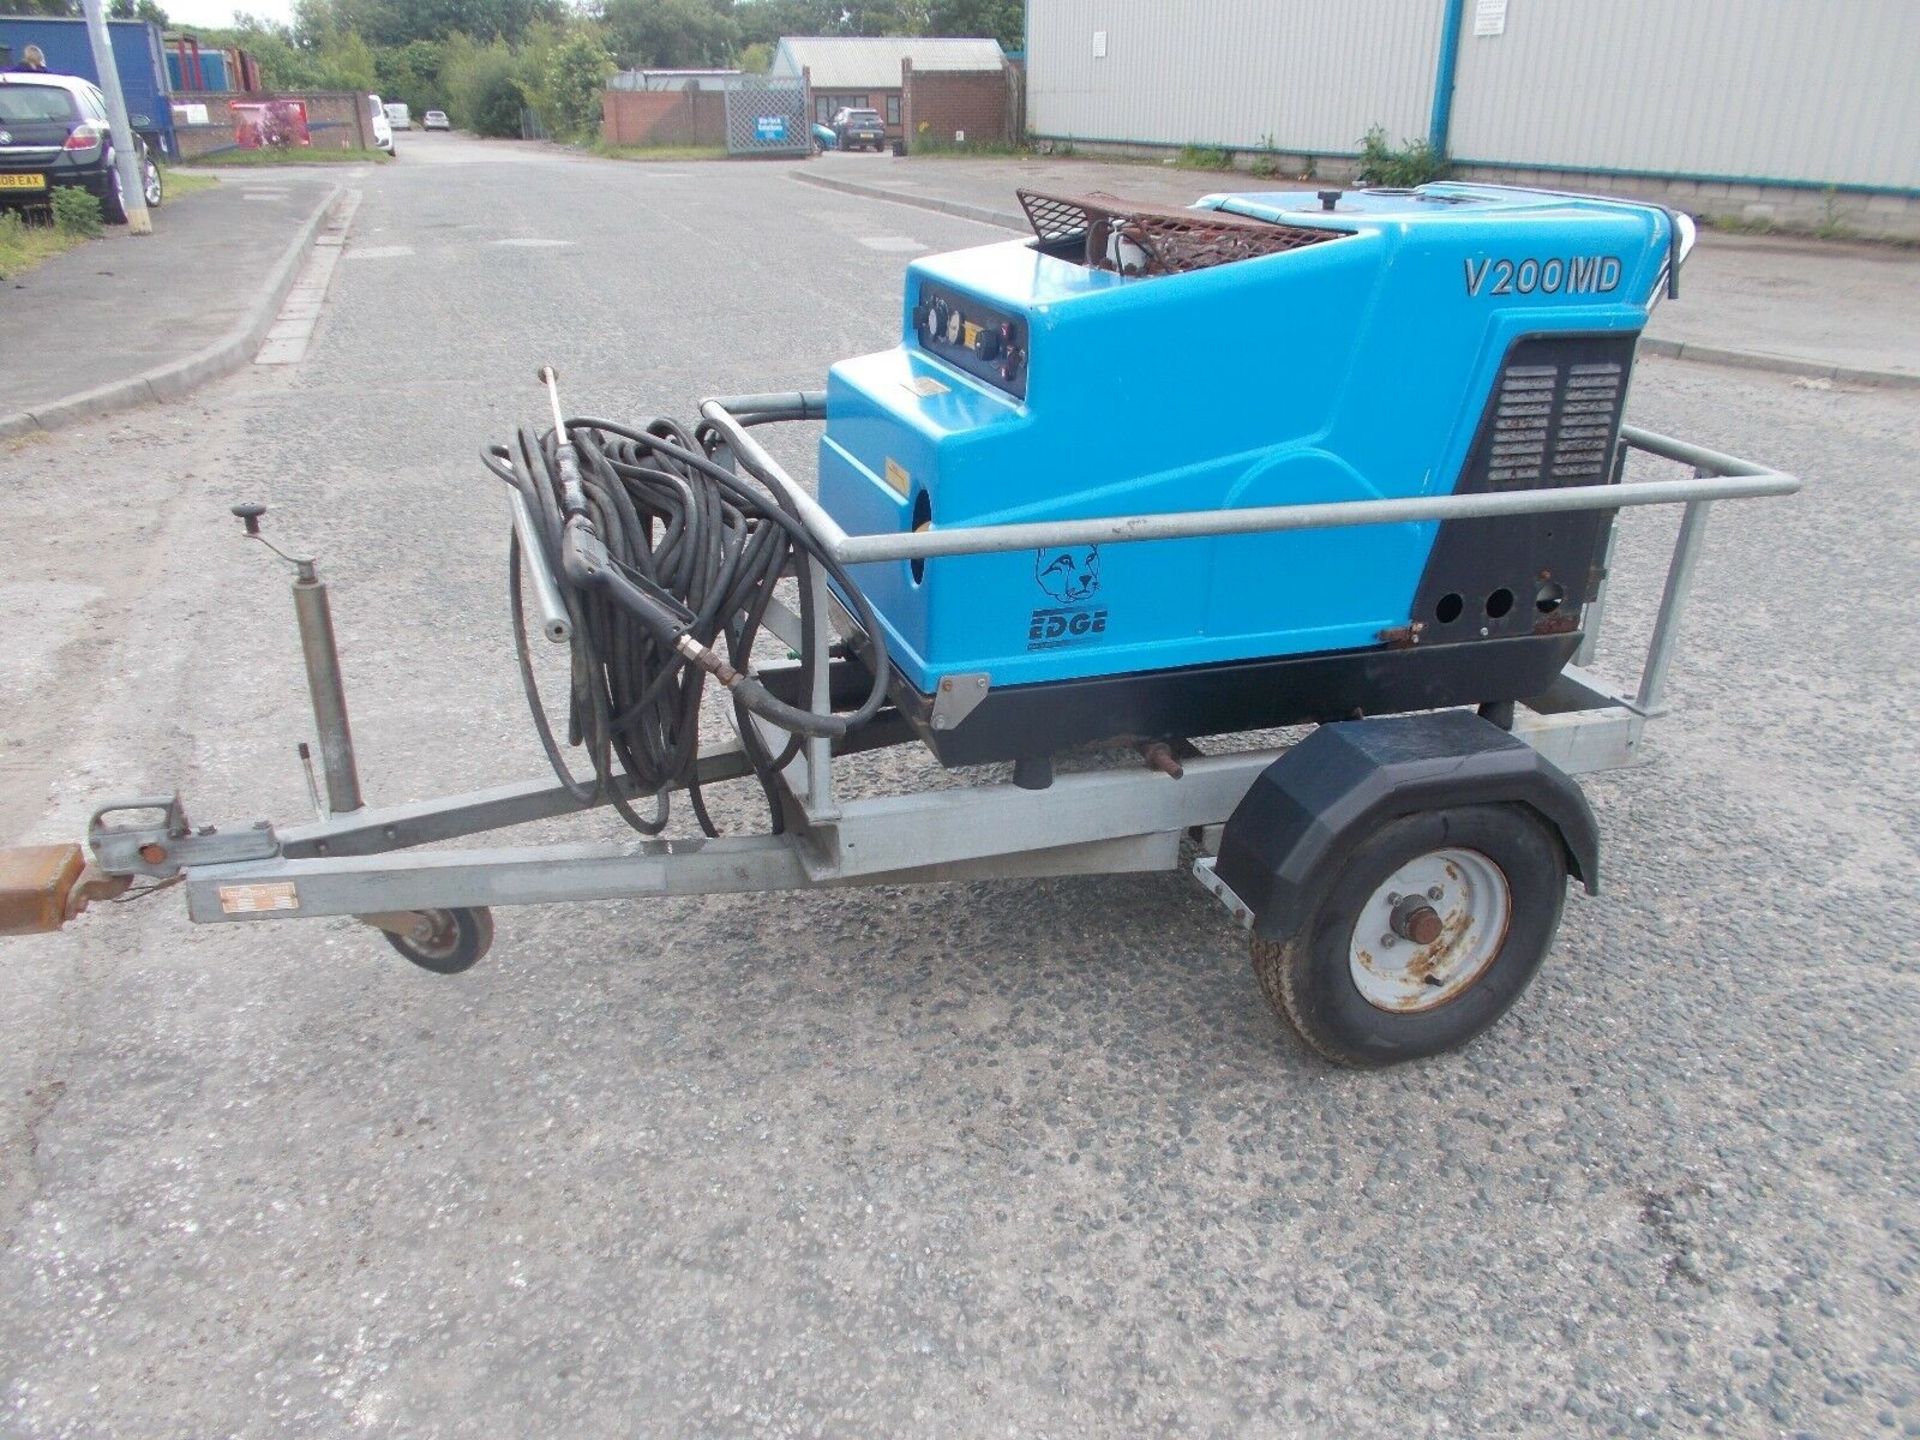 Edge V 200 MD Towable Hot and Cold Diesel Engined Pressure Washer - Image 6 of 7